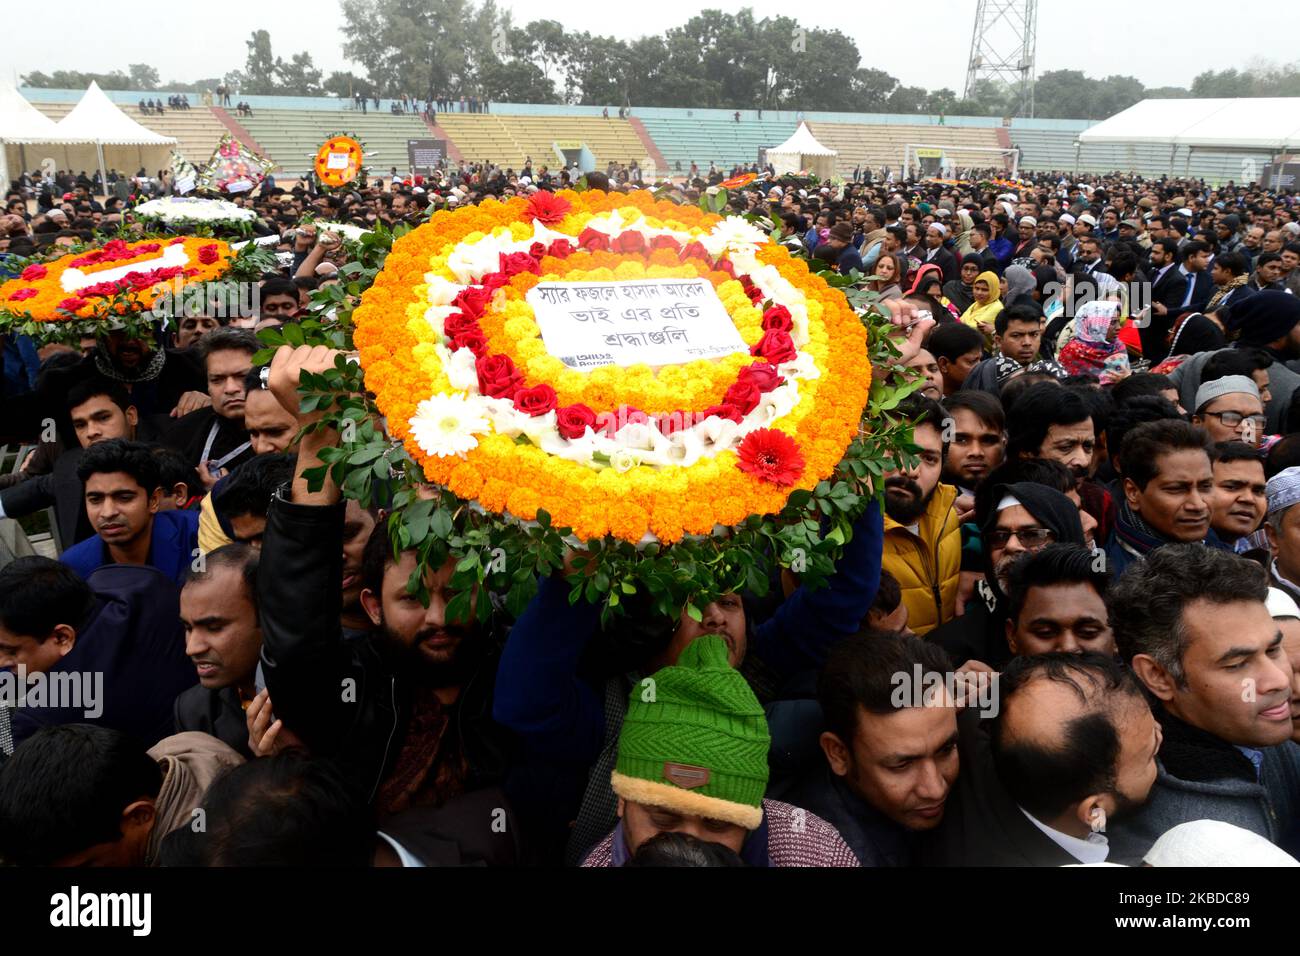 People wait to pay their respects to the late Sir Fazle Hasan Abed, the founder of the Bangladesh Rural Advancement Committee (BRAC), in Dhaka, Bangladesh, on December 22, 2019. Thousands gathered in Bangladesh's capital on December 22 to attend the funeral of Sir Fazle Hasan Abed, founder of BRAC, one of the world's largest NGOs, to show their final respect. (Photo by Mamunur Rashid/NurPhoto) Stock Photo